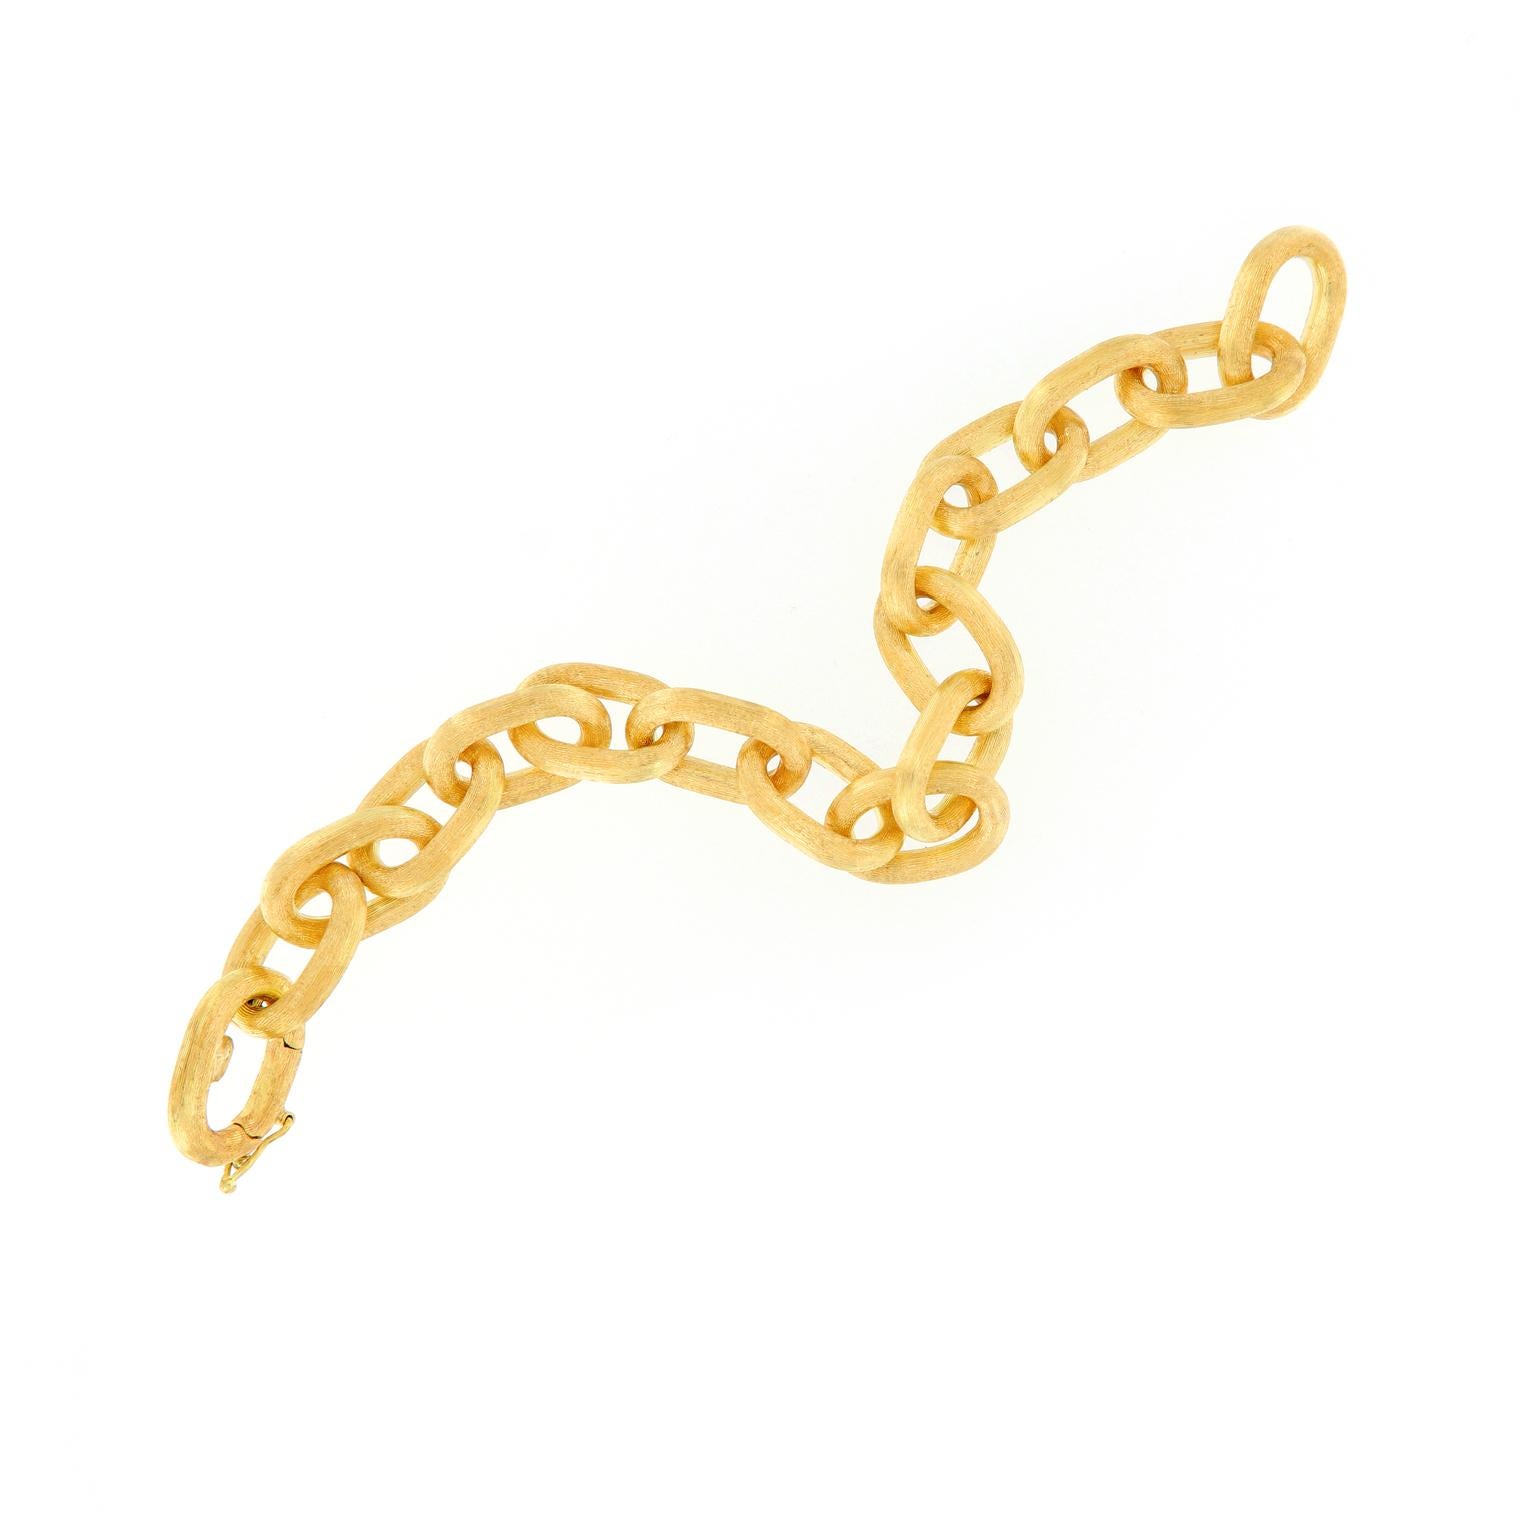 Sophisticated and yet perfectly chunky, this gold bracelet is bold enough to draw compliments but subtle enough for everyday wear. Oval links are expertly crafted in 18k yellow gold with a Florentine finish. Weighs 26.5 grams.